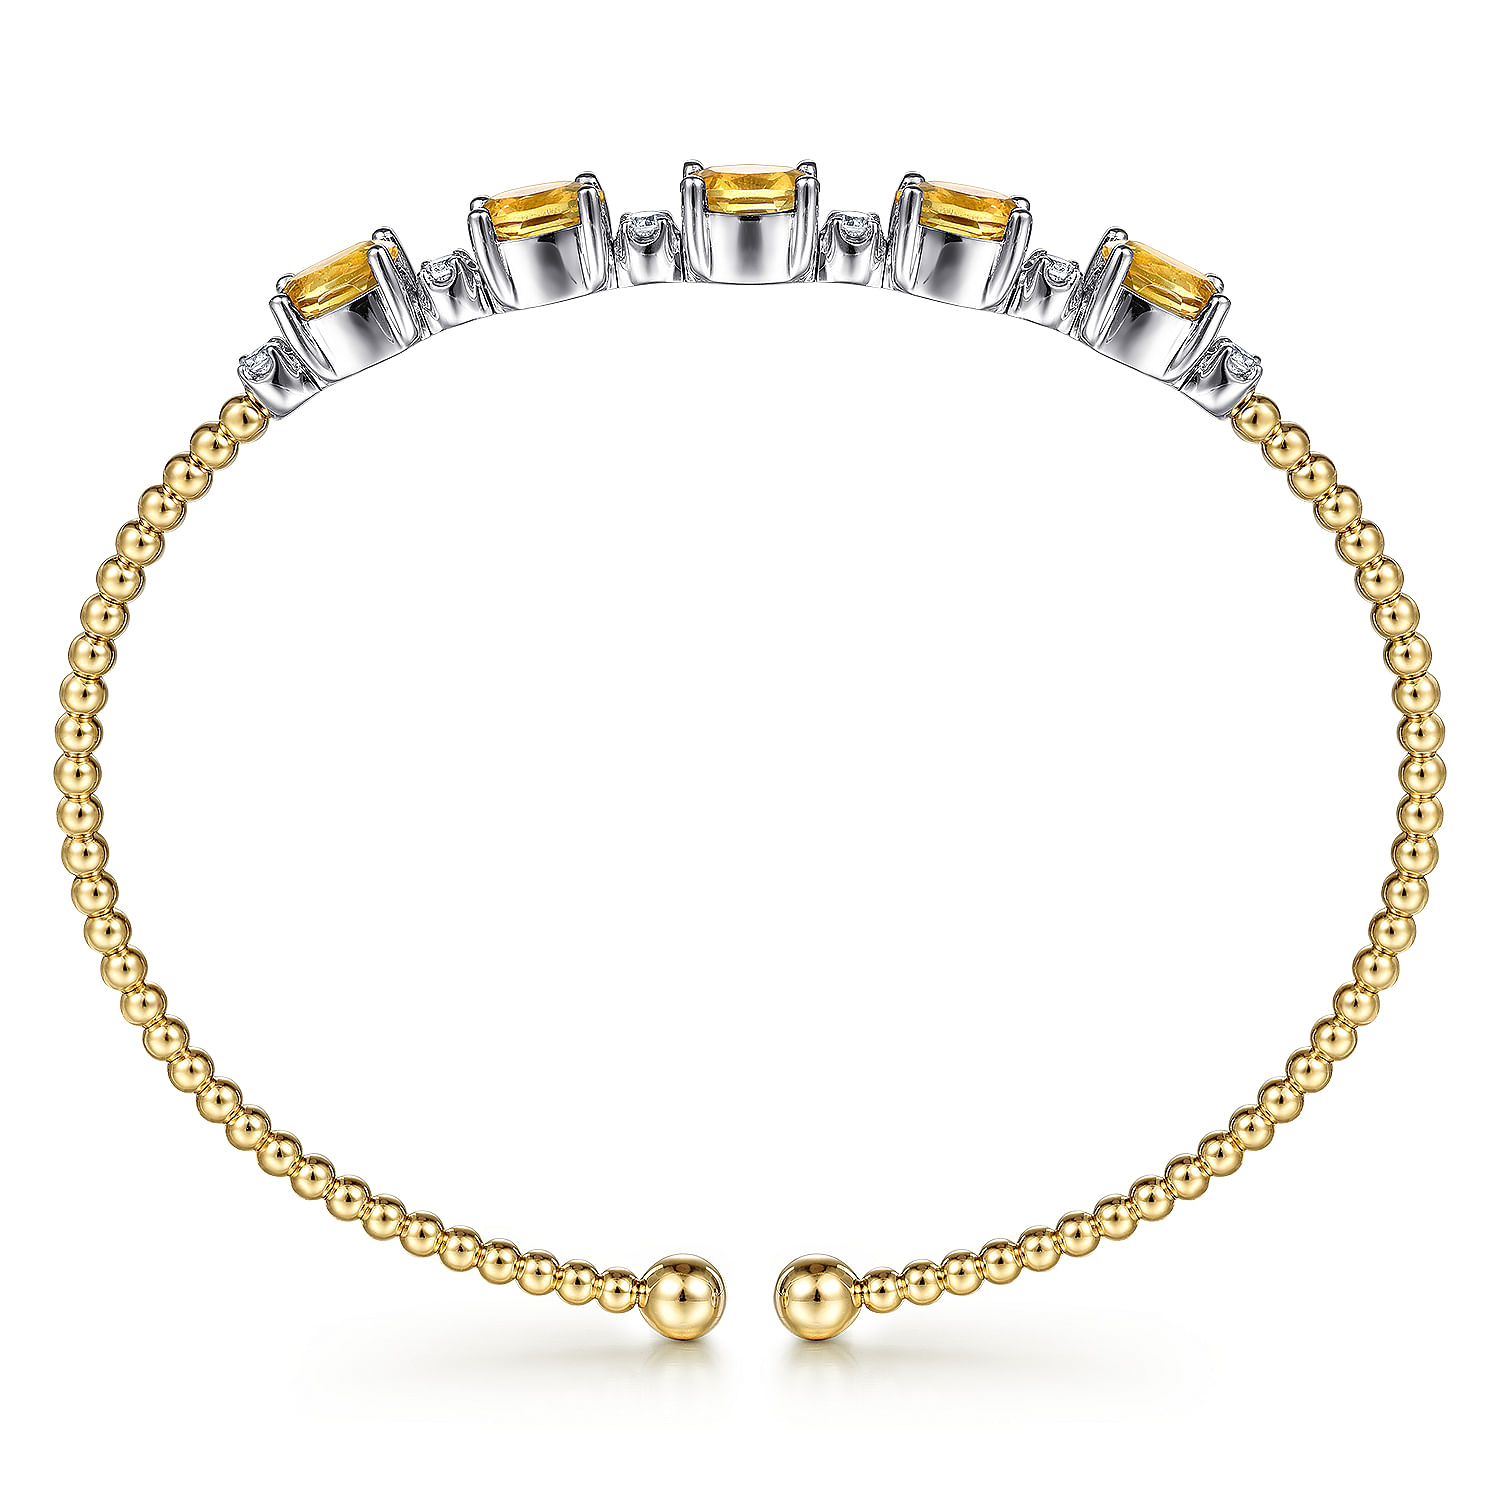 14K White-Yellow Gold Bujukan Bead Cuff Bracelet with Citrine and Diamond Stations